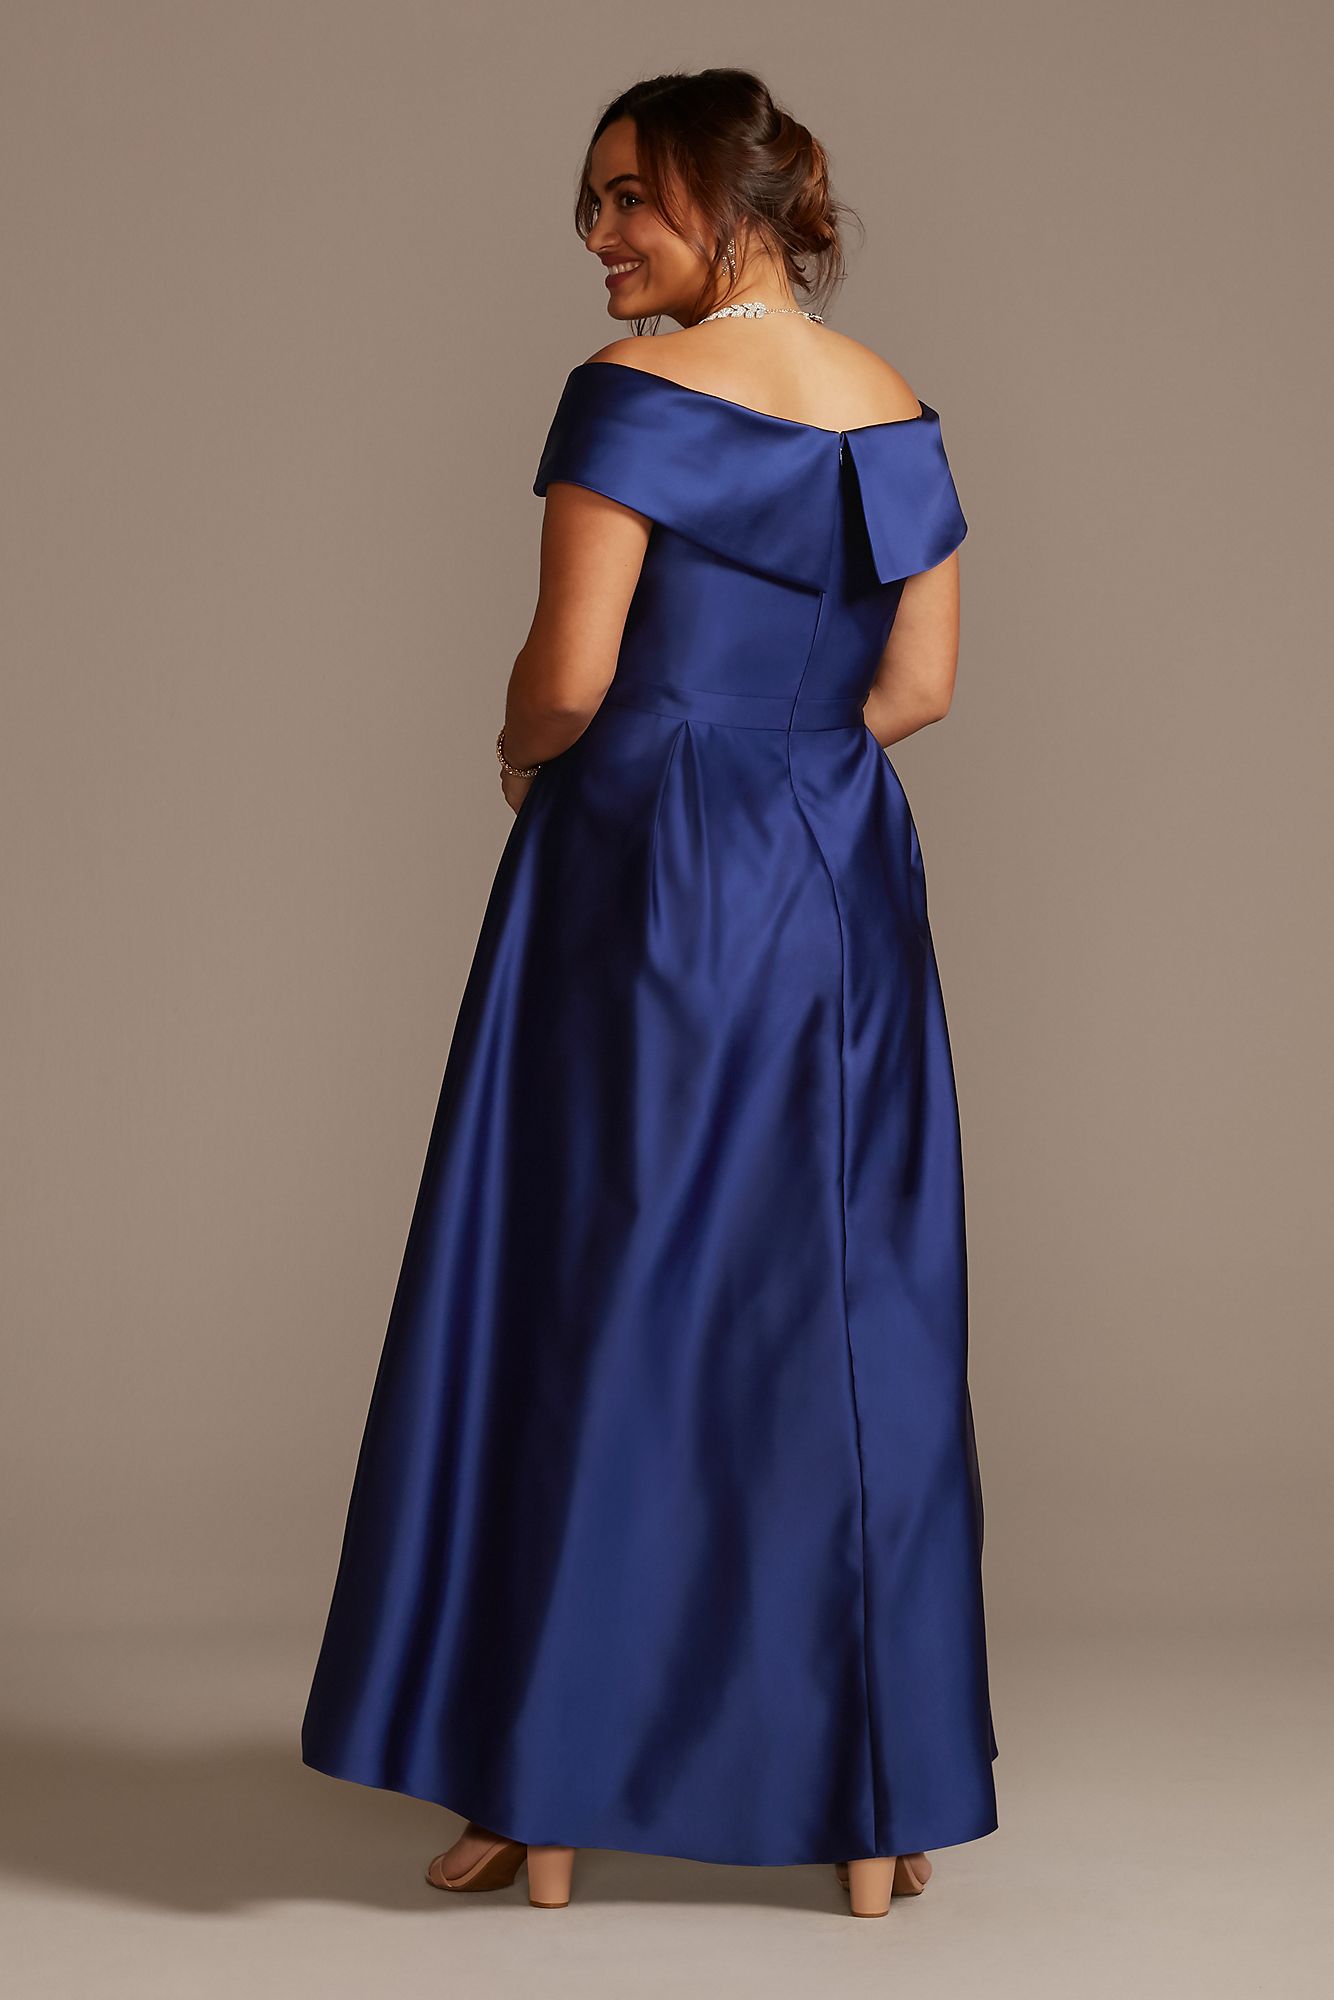 Satin Plus Size Ball Gown with Portrait Collar  3476XW